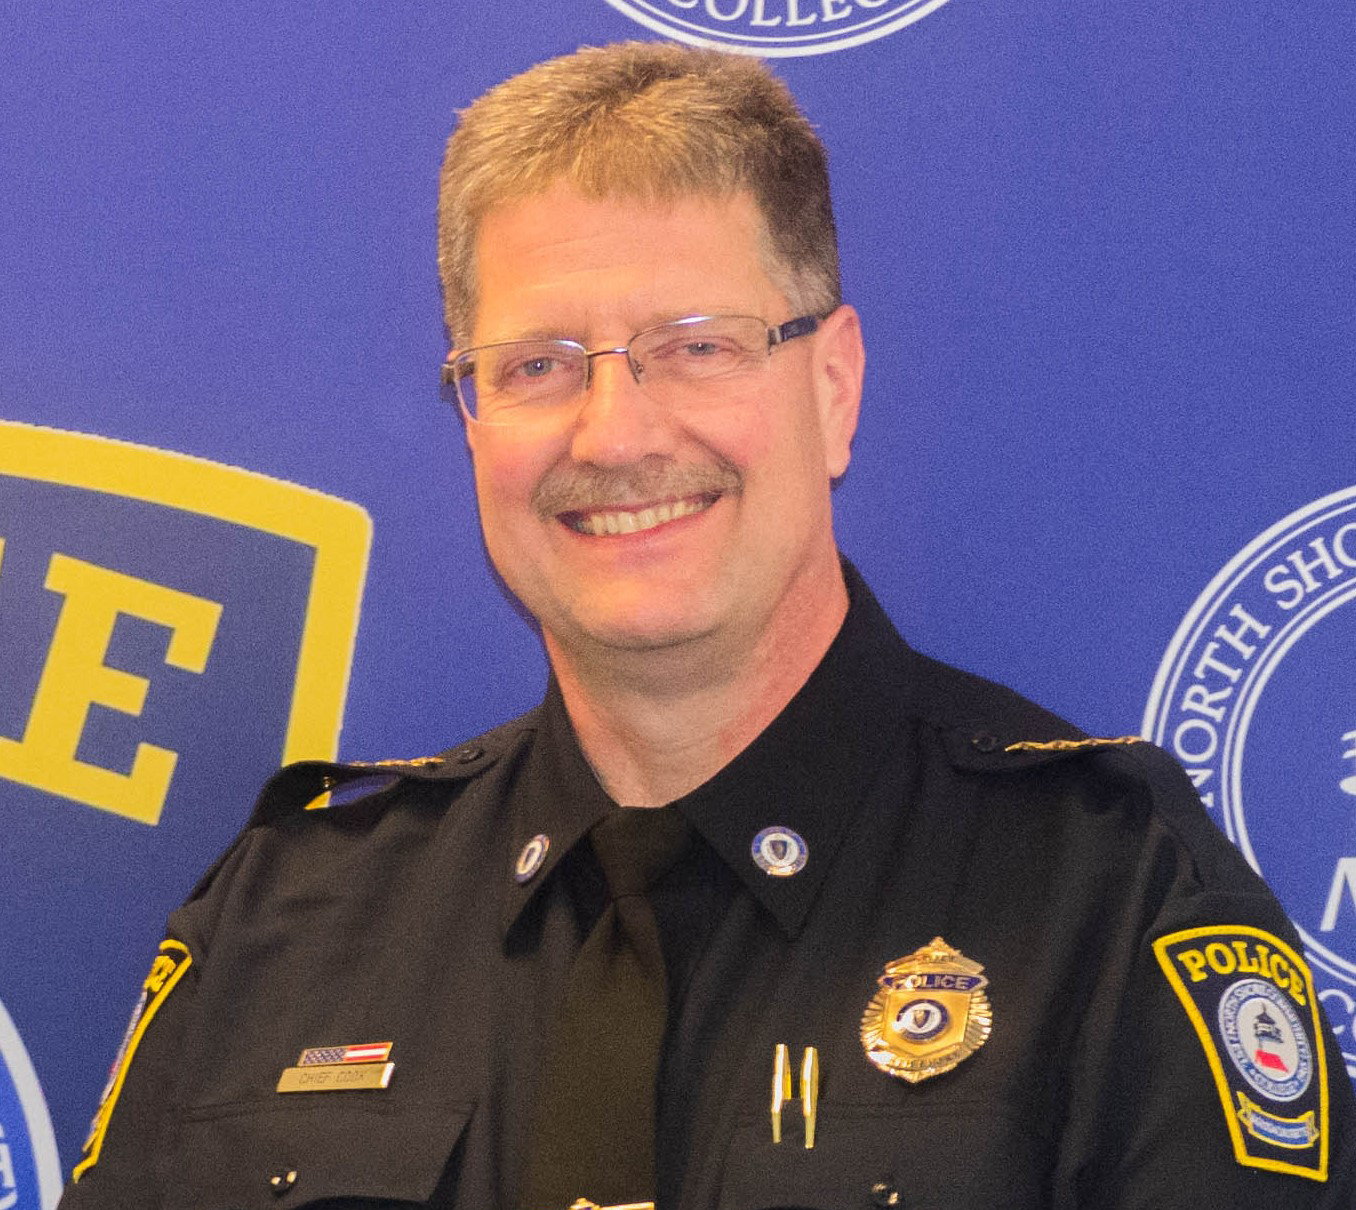 Police Chief David Cook